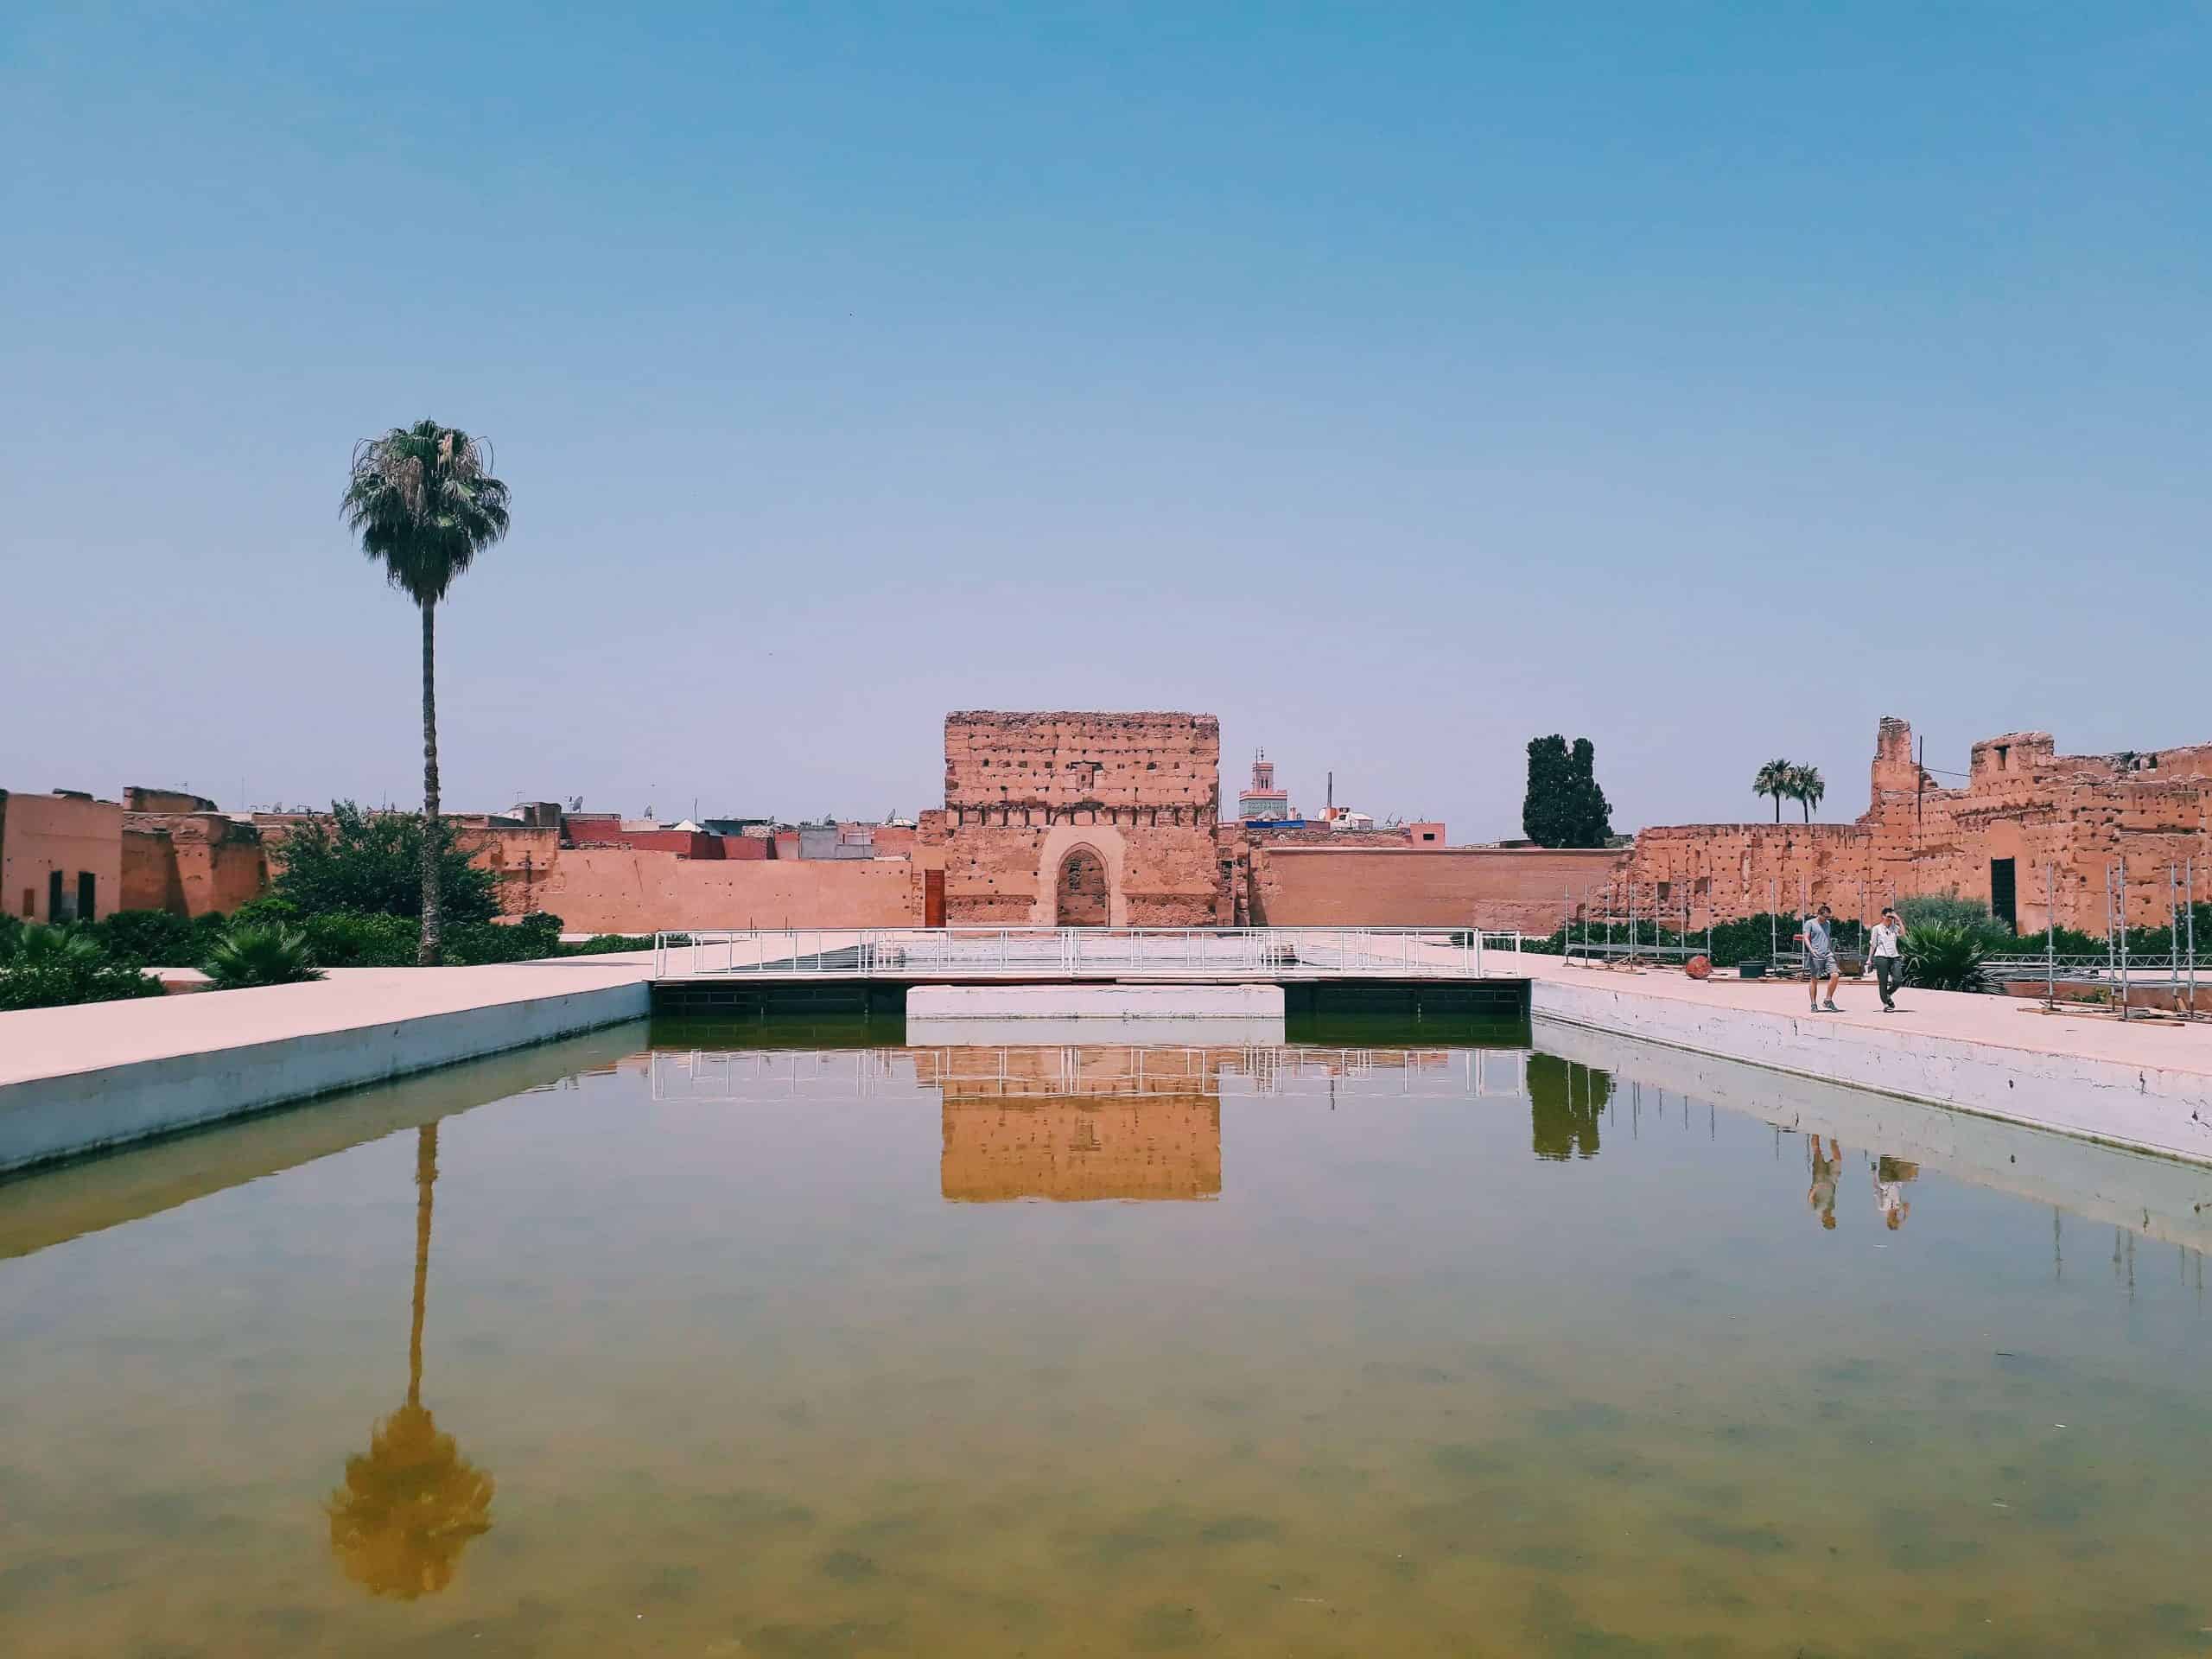 El Badi Palace Opening hours price and location in Marrakech